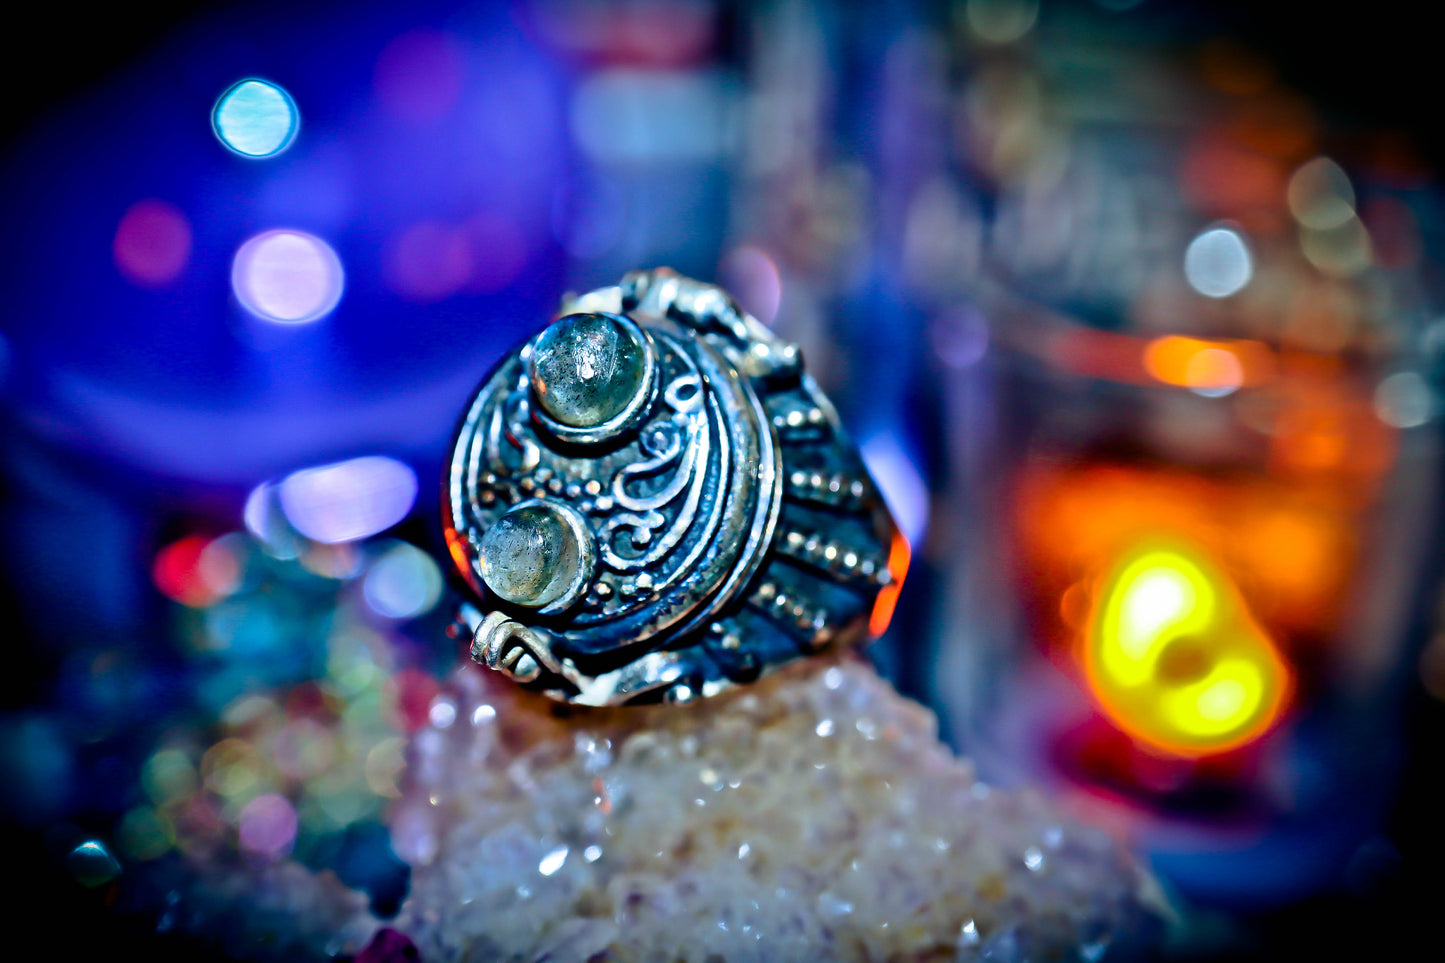 MASTER HIGH FREQUENCY Secret Society Poison Ring Haunted 333 Magick Spells & Magickal Power! $$ Occult Secrets $$ AMAZING! Poison Ring w/ Hidden Compartment! * 925 Sterling Silver!